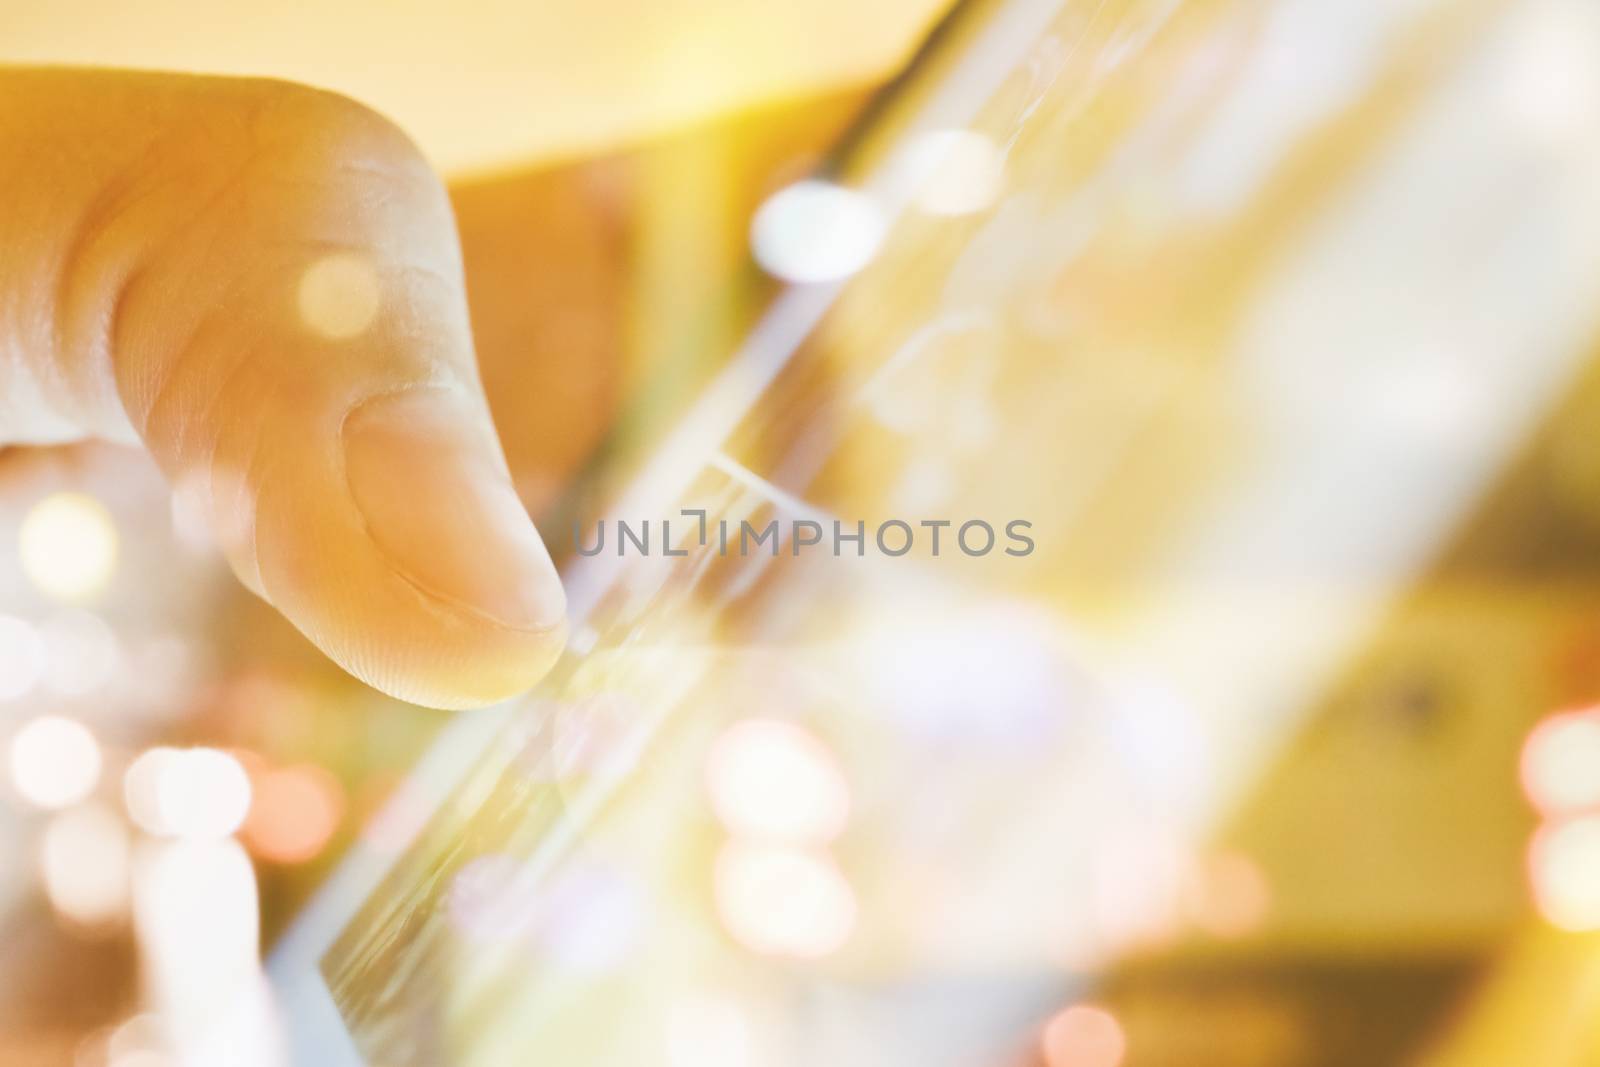 close up of Male fingers touching tablet screen double exposure and blurred view of car on street at night